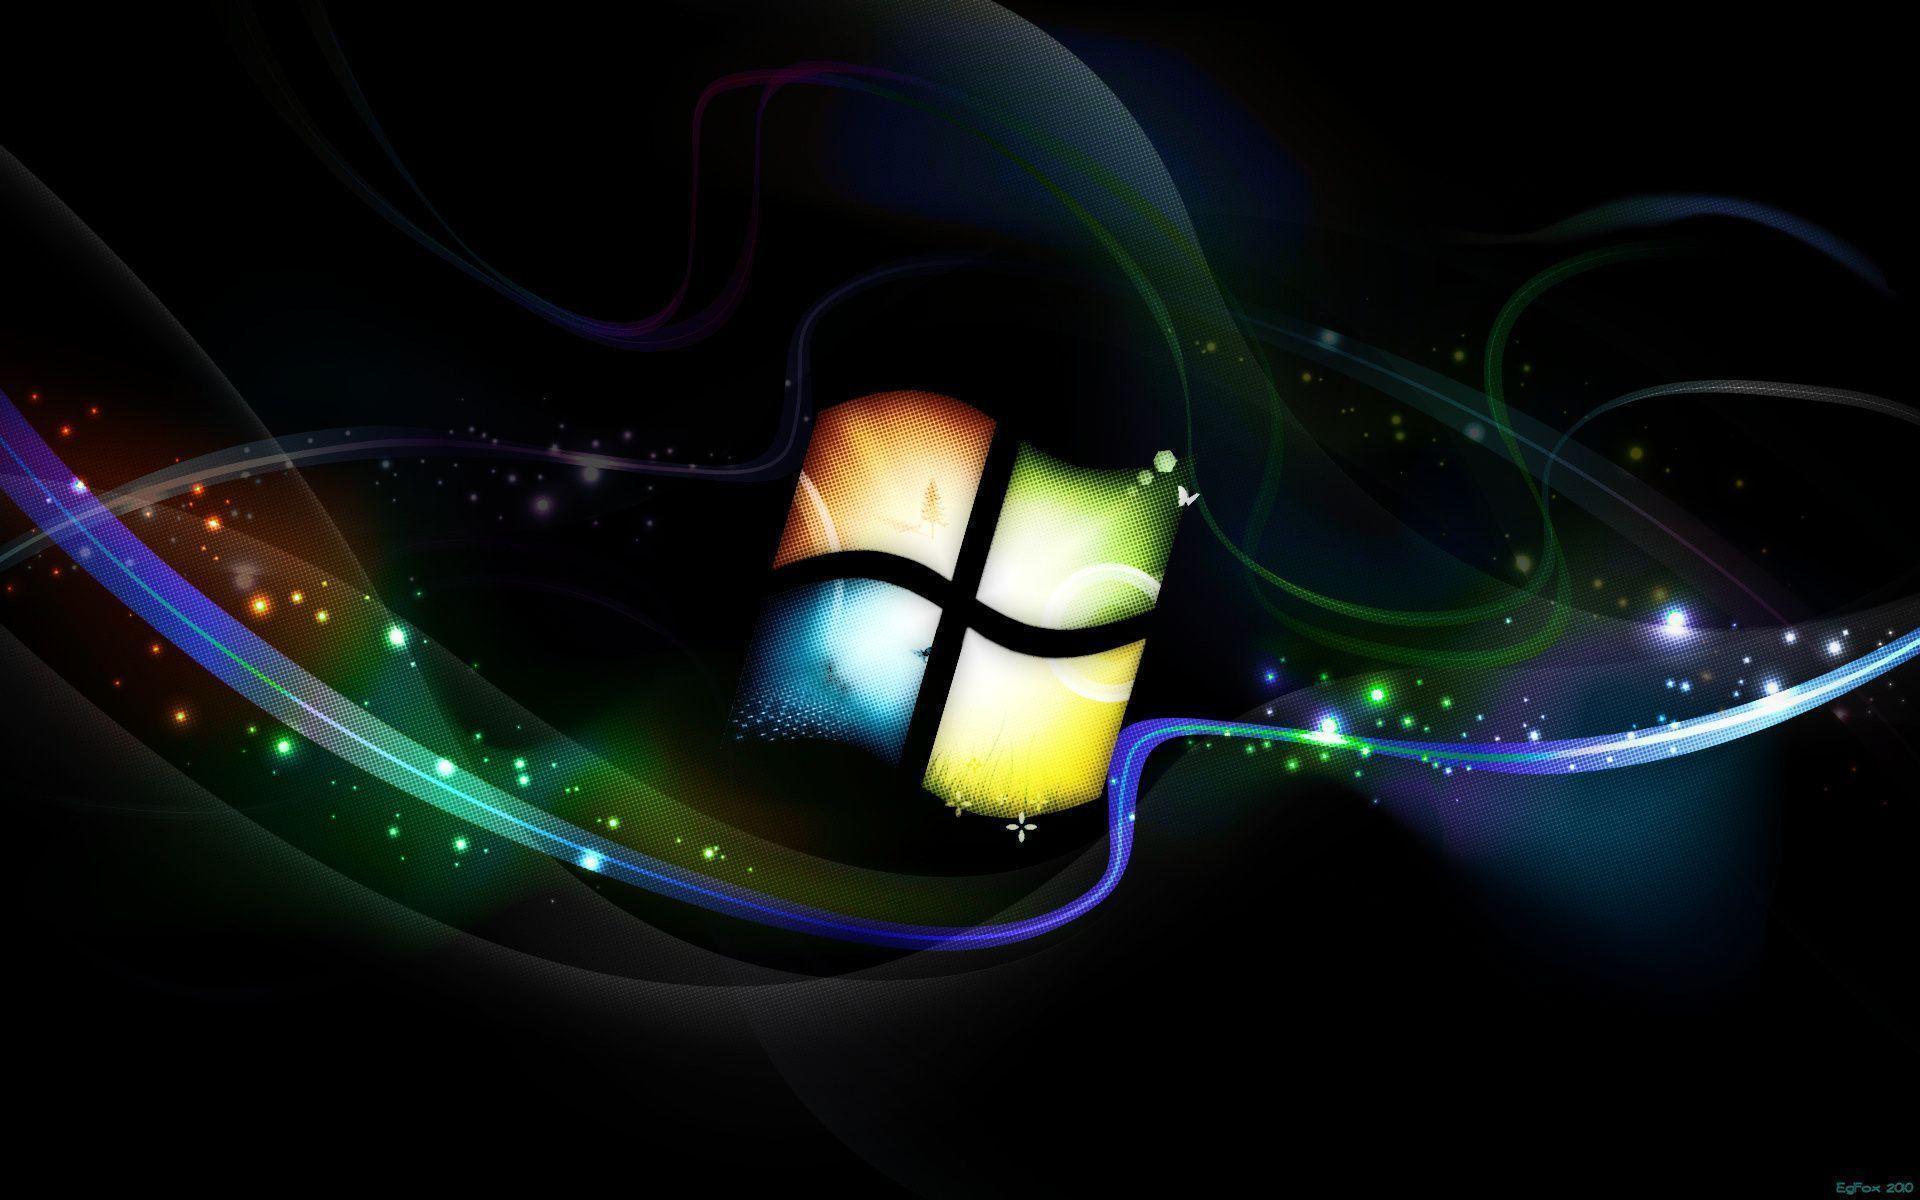 Wallpaper For > Windows Xp Background